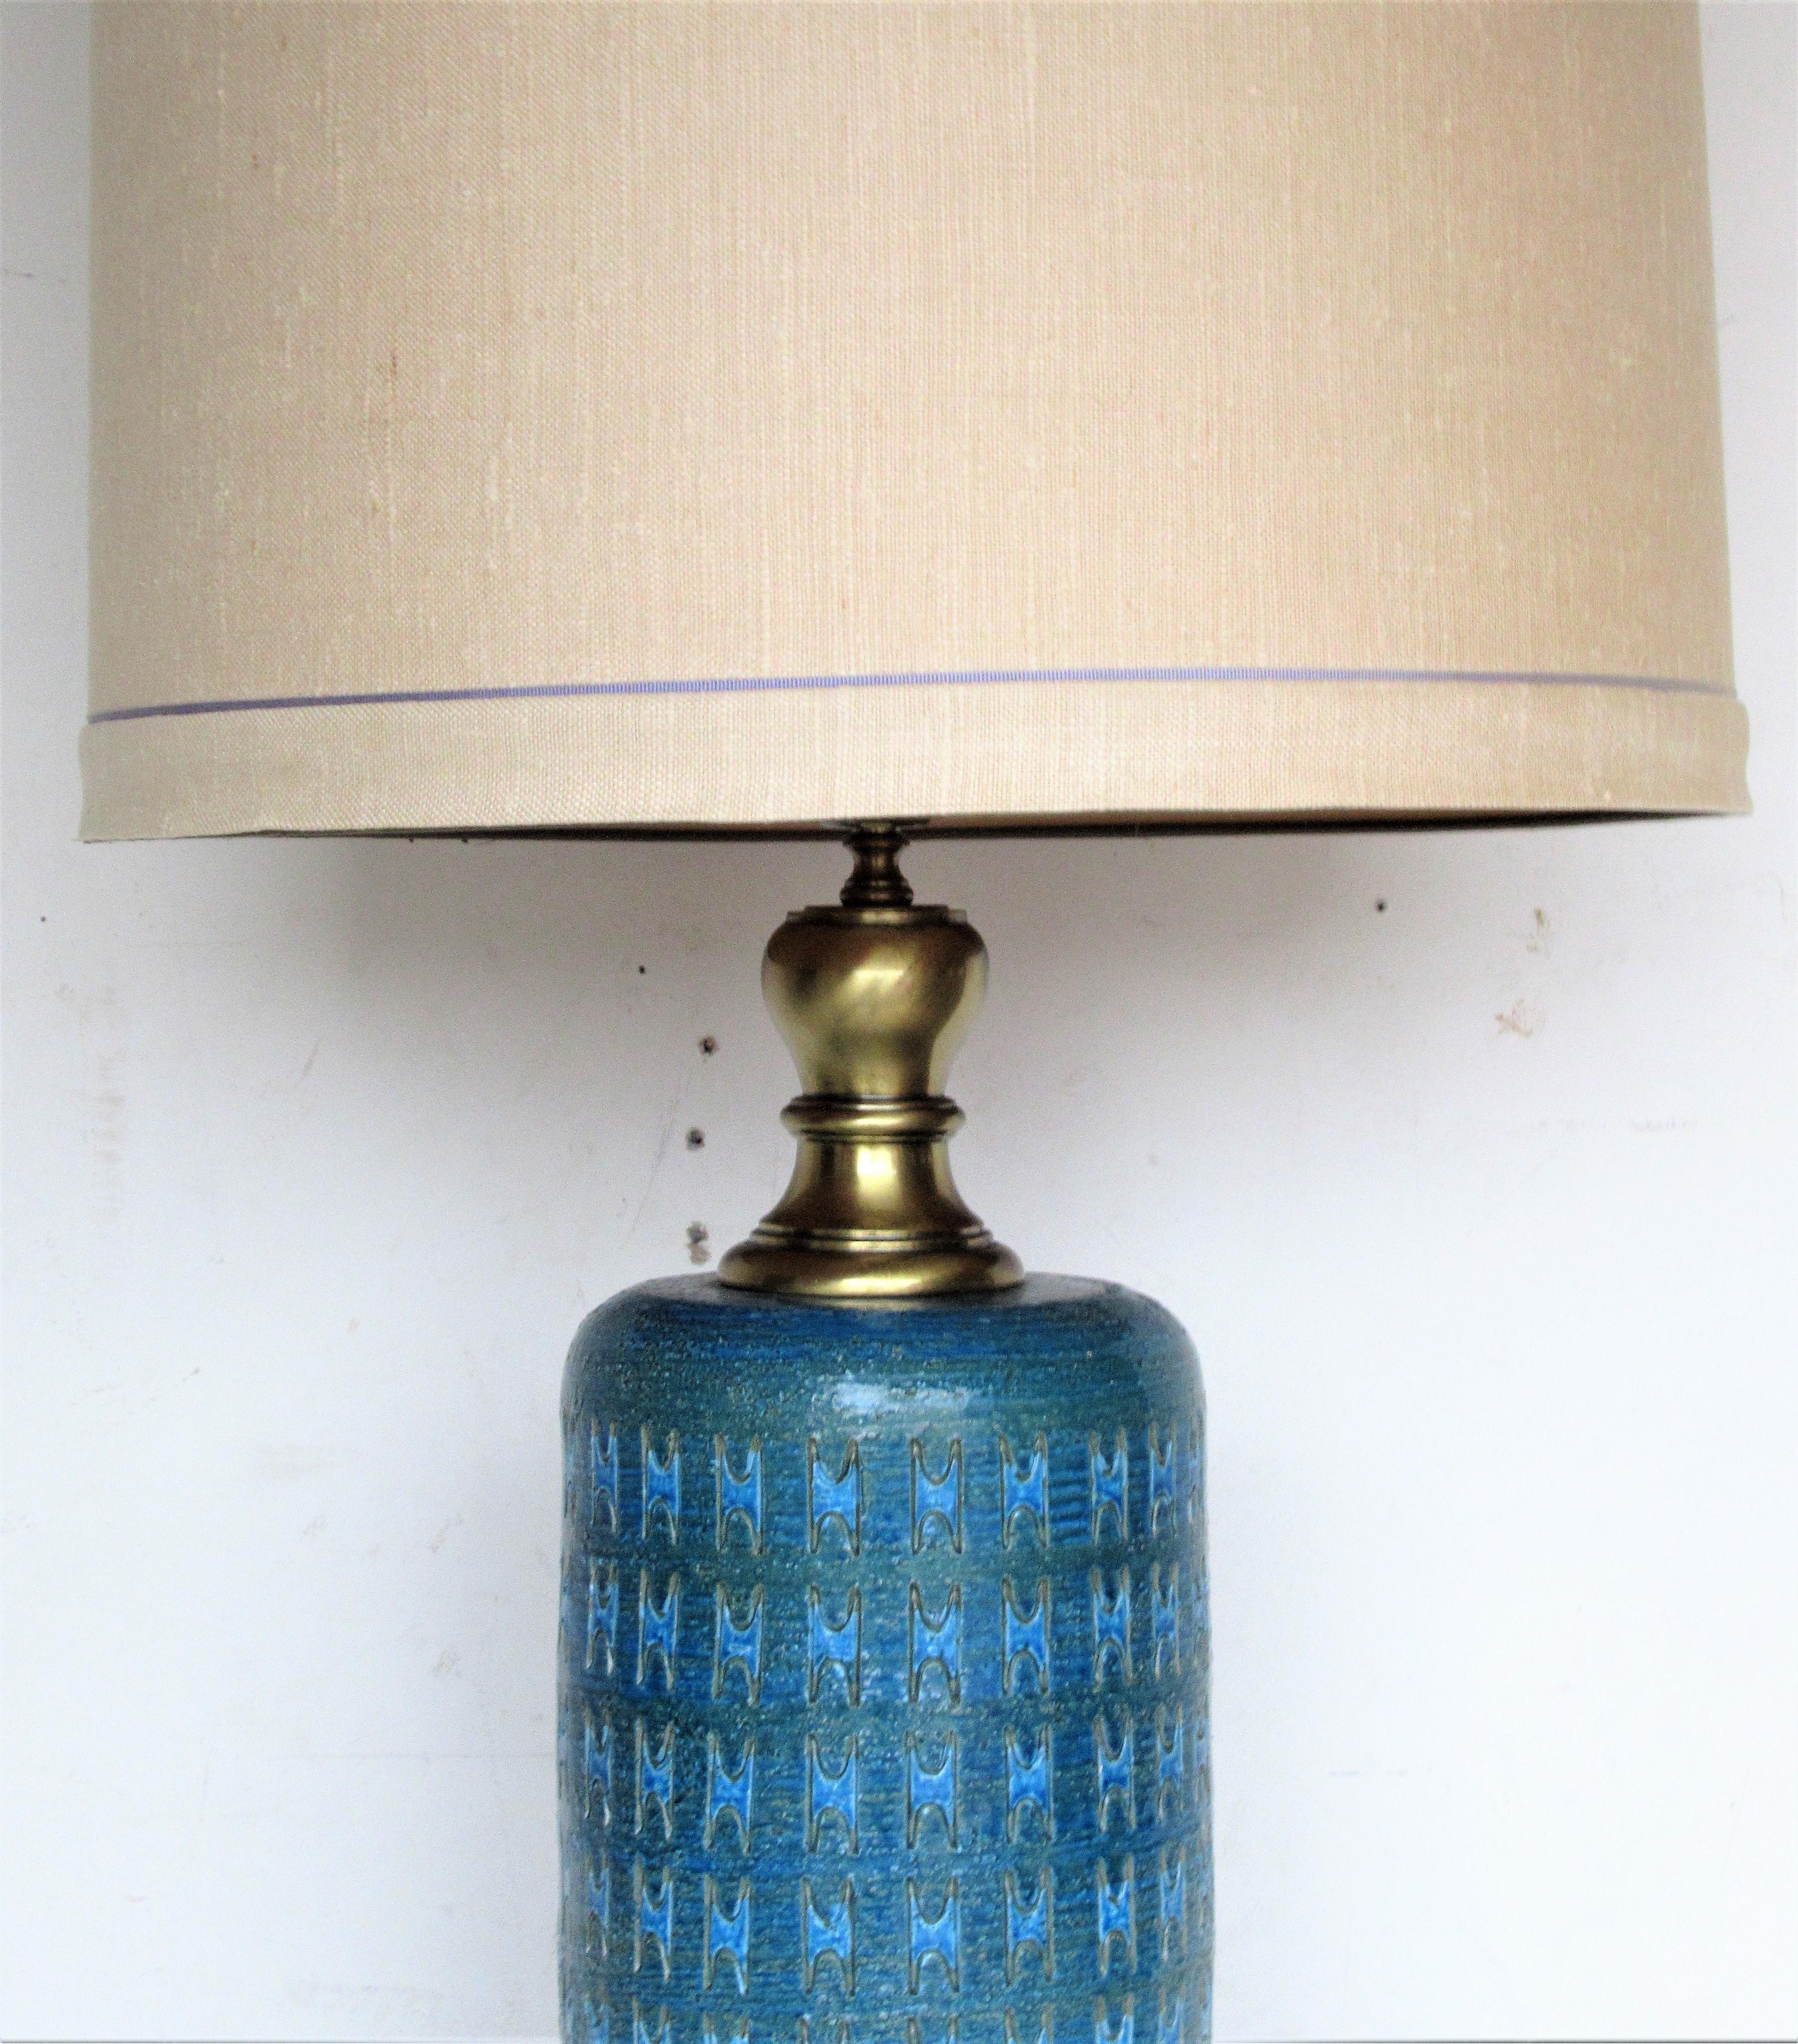 Big and tall Italian pottery table lamp in Rimini blue by Aldo Londi for Bitossi in great all original condition, circa 1960s. Lamp measures: 44 inches high to top of brass finial x 31 inches high to bulb socket x 8 diameter at base. Look at all